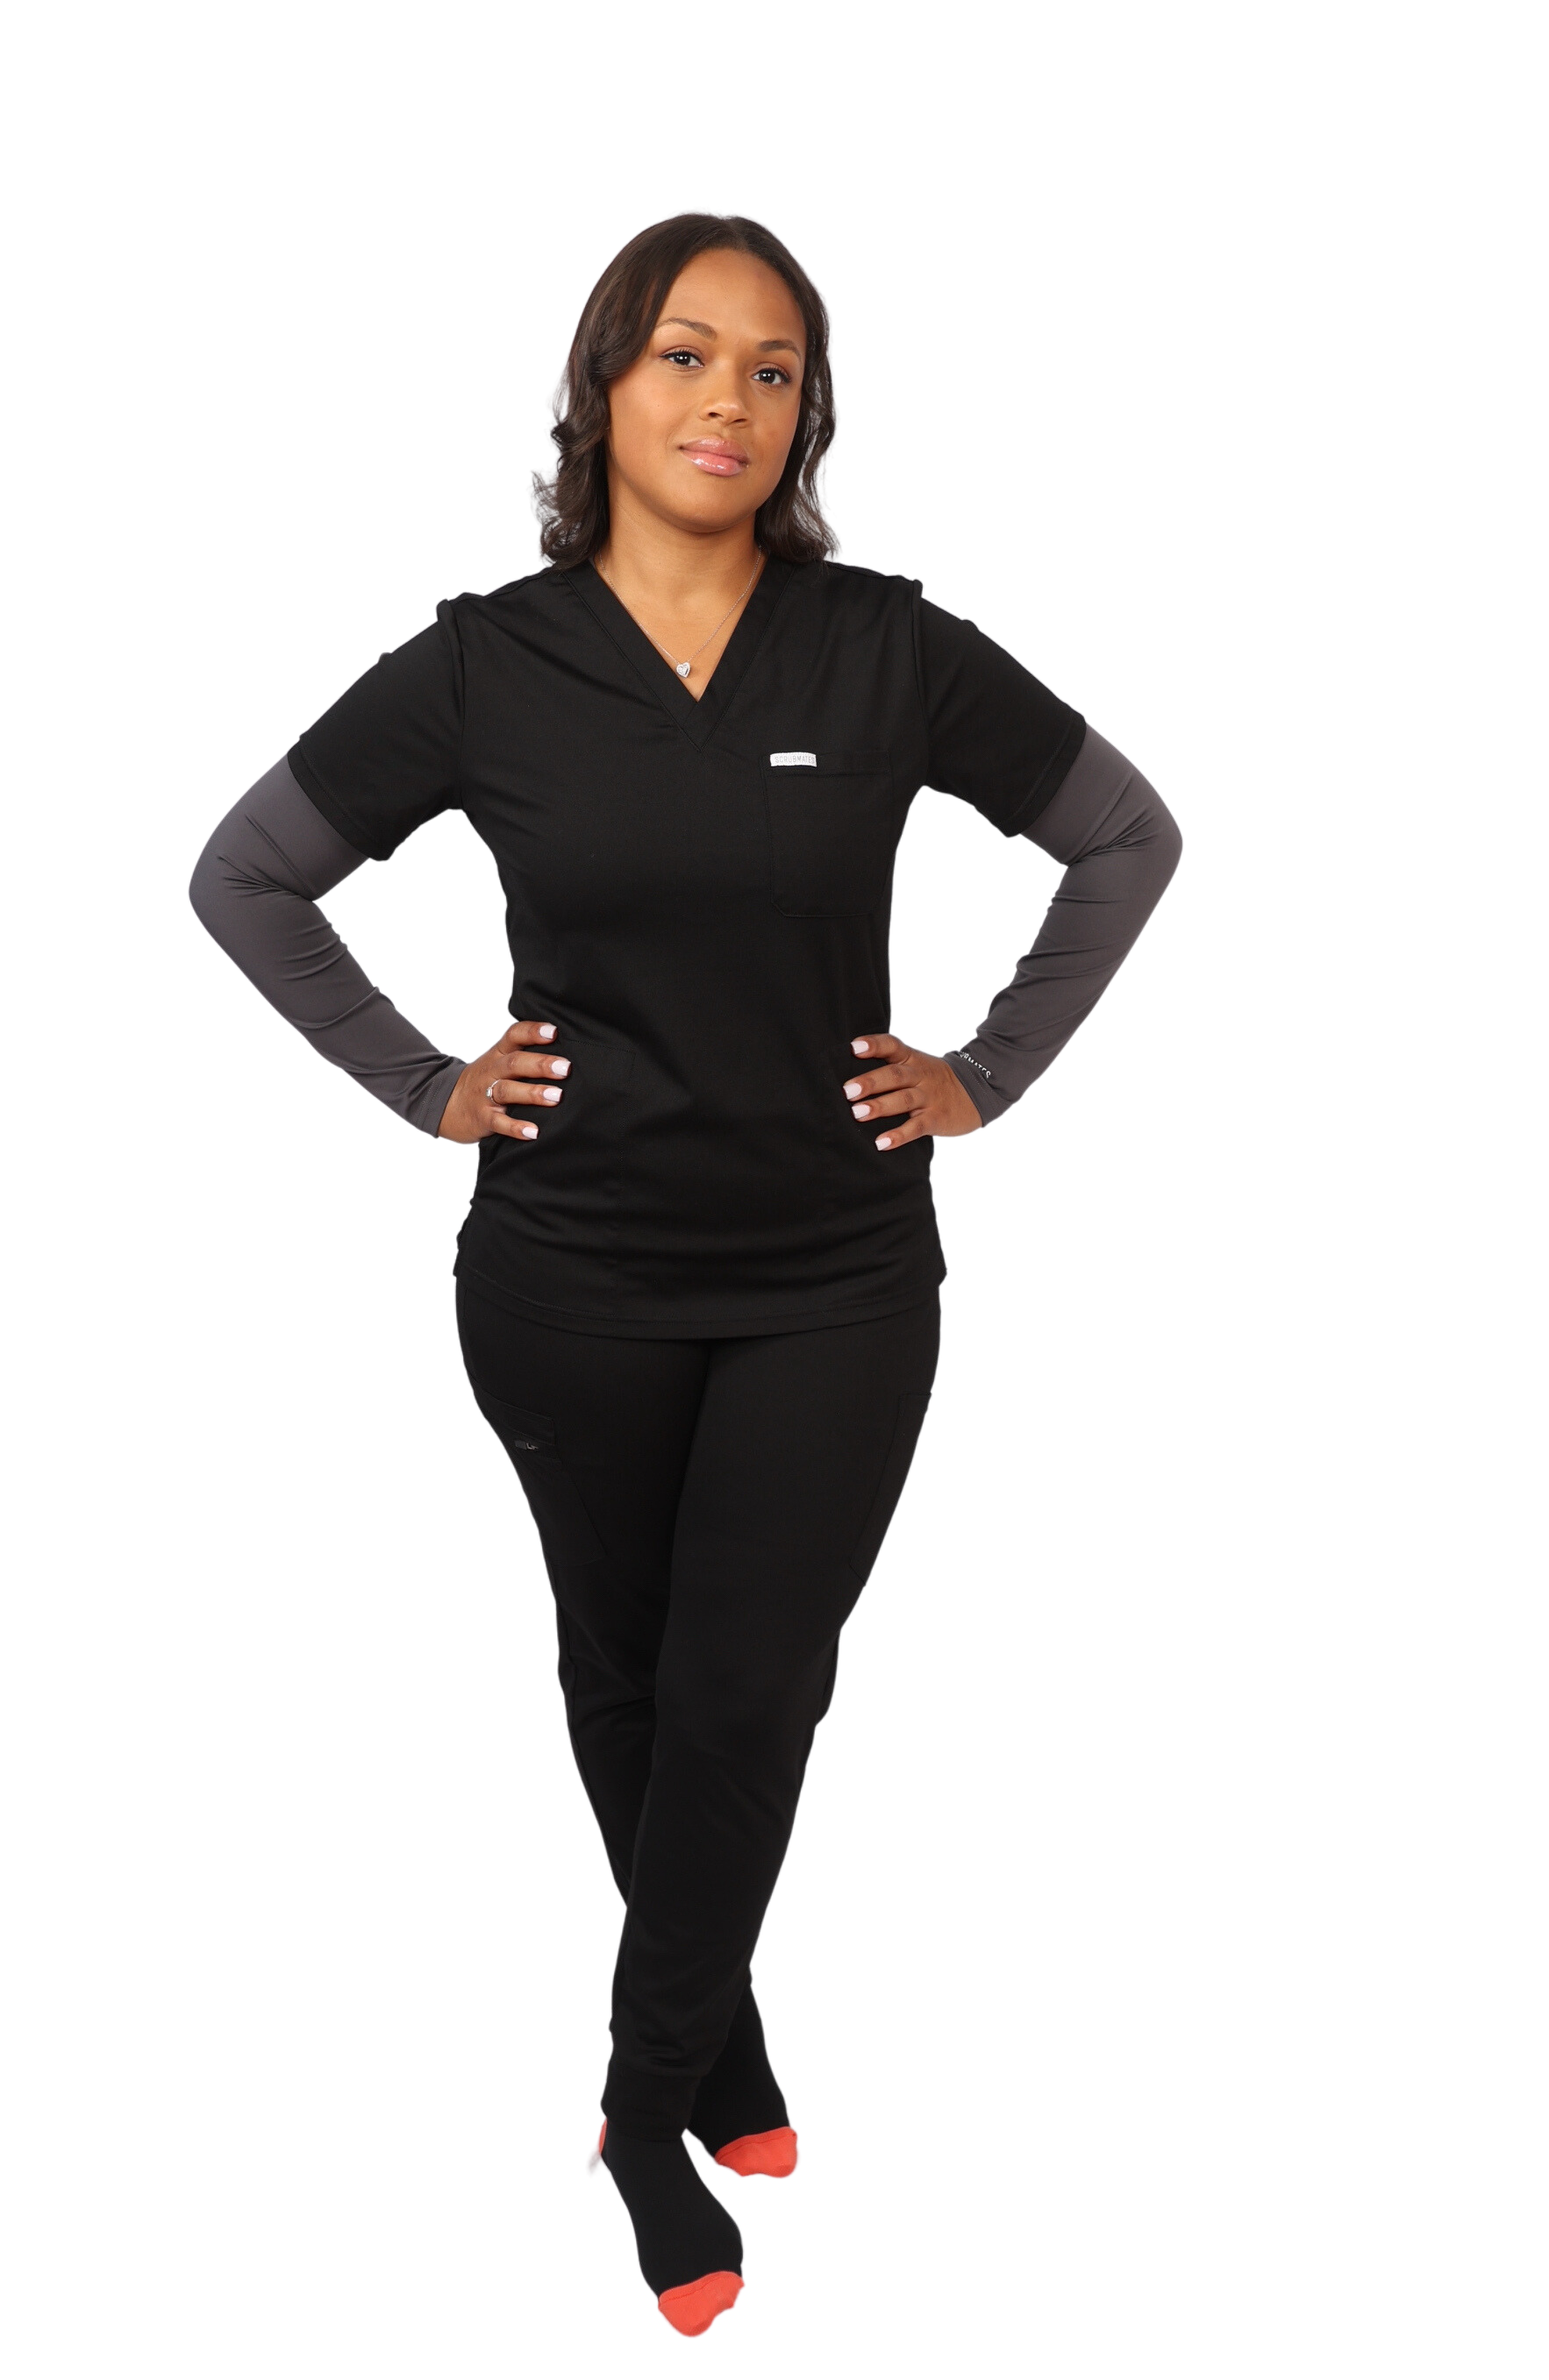 medical work uniform stretchy comfy Scrubmates modern fit jogger black scrub pants for women made to pair perfectly with our modern fit top. Our exclusive design is on trend, professional and stylish. Made from a superior quality nylon/rayon/spandex fabric mix, these pants offer unparalleled all-day comfort. Our luxe fabric blend offers the ultimate amount of stretch, and is designed to be flattering at every angle innovative design offers six deep pants pockets best scrubs for women figs scrubs